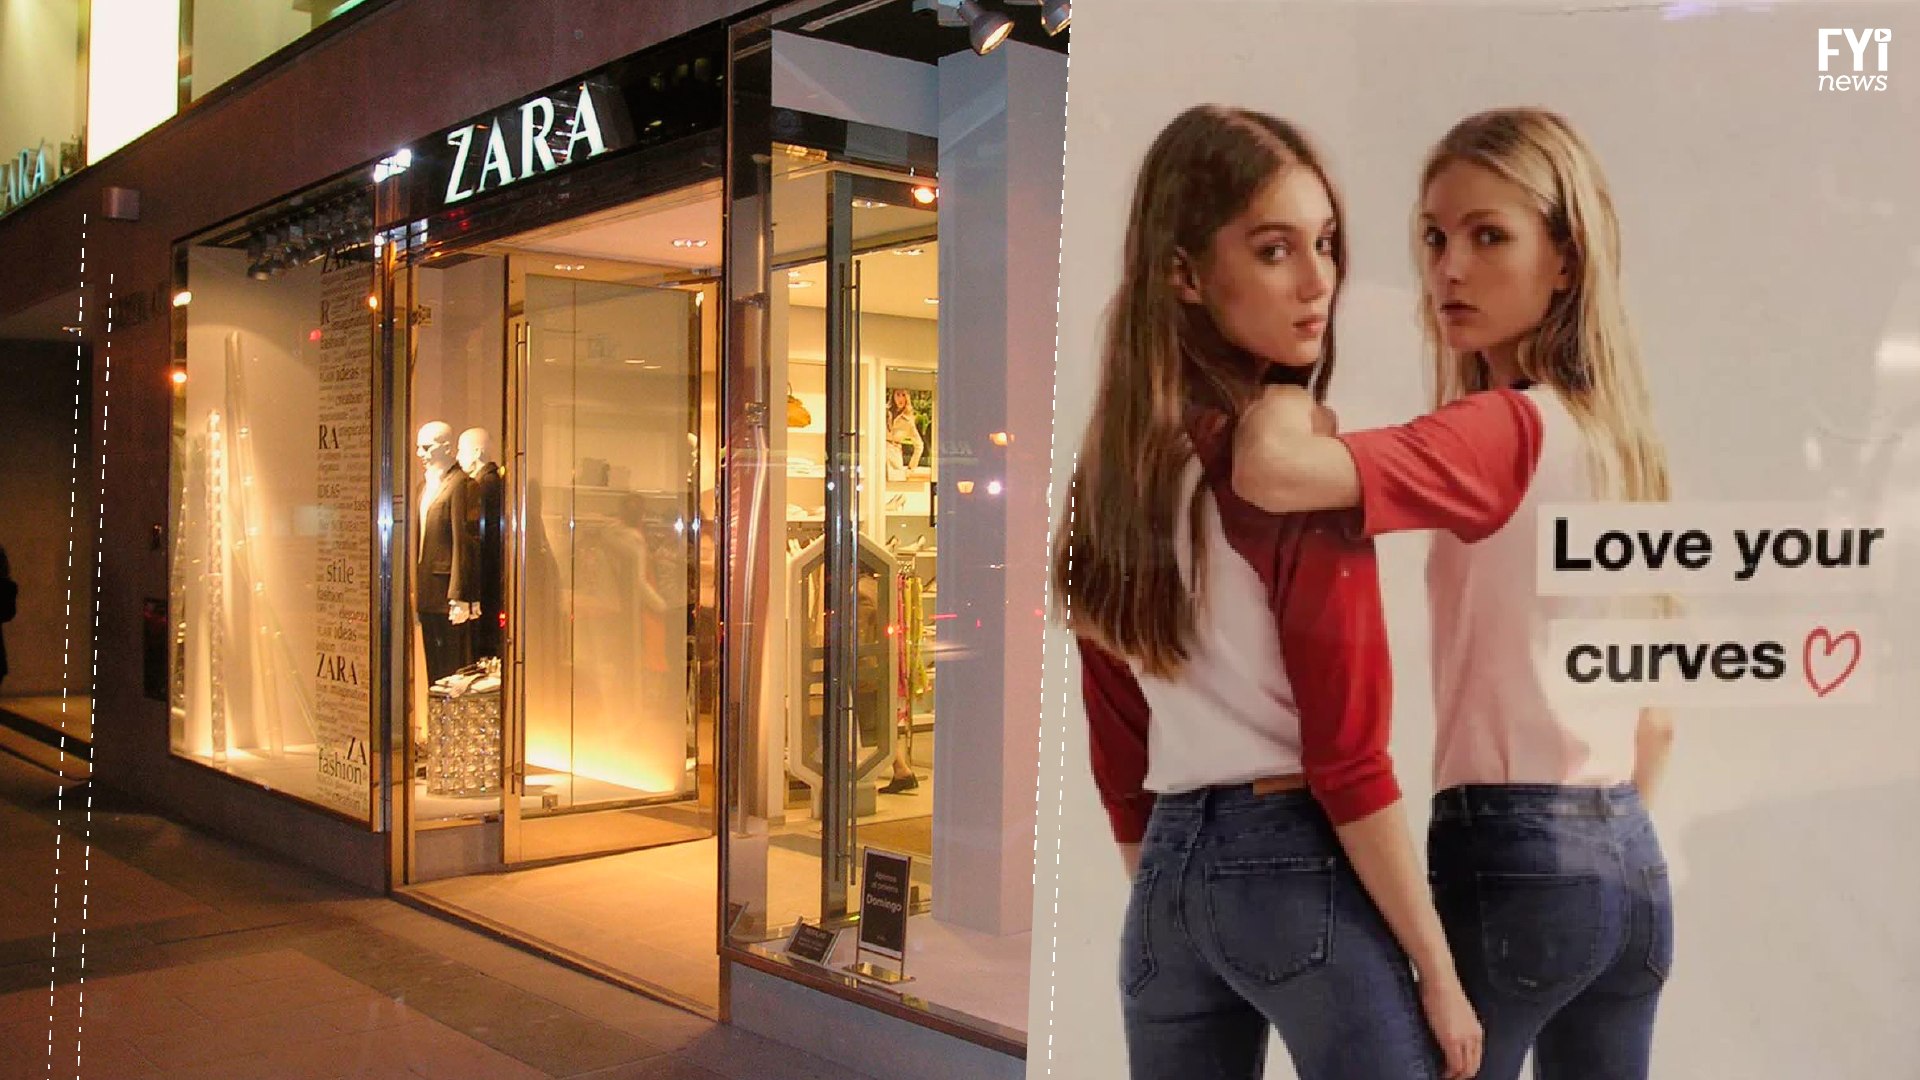 Zara's New Campaign Causes Controversy - video Dailymotion